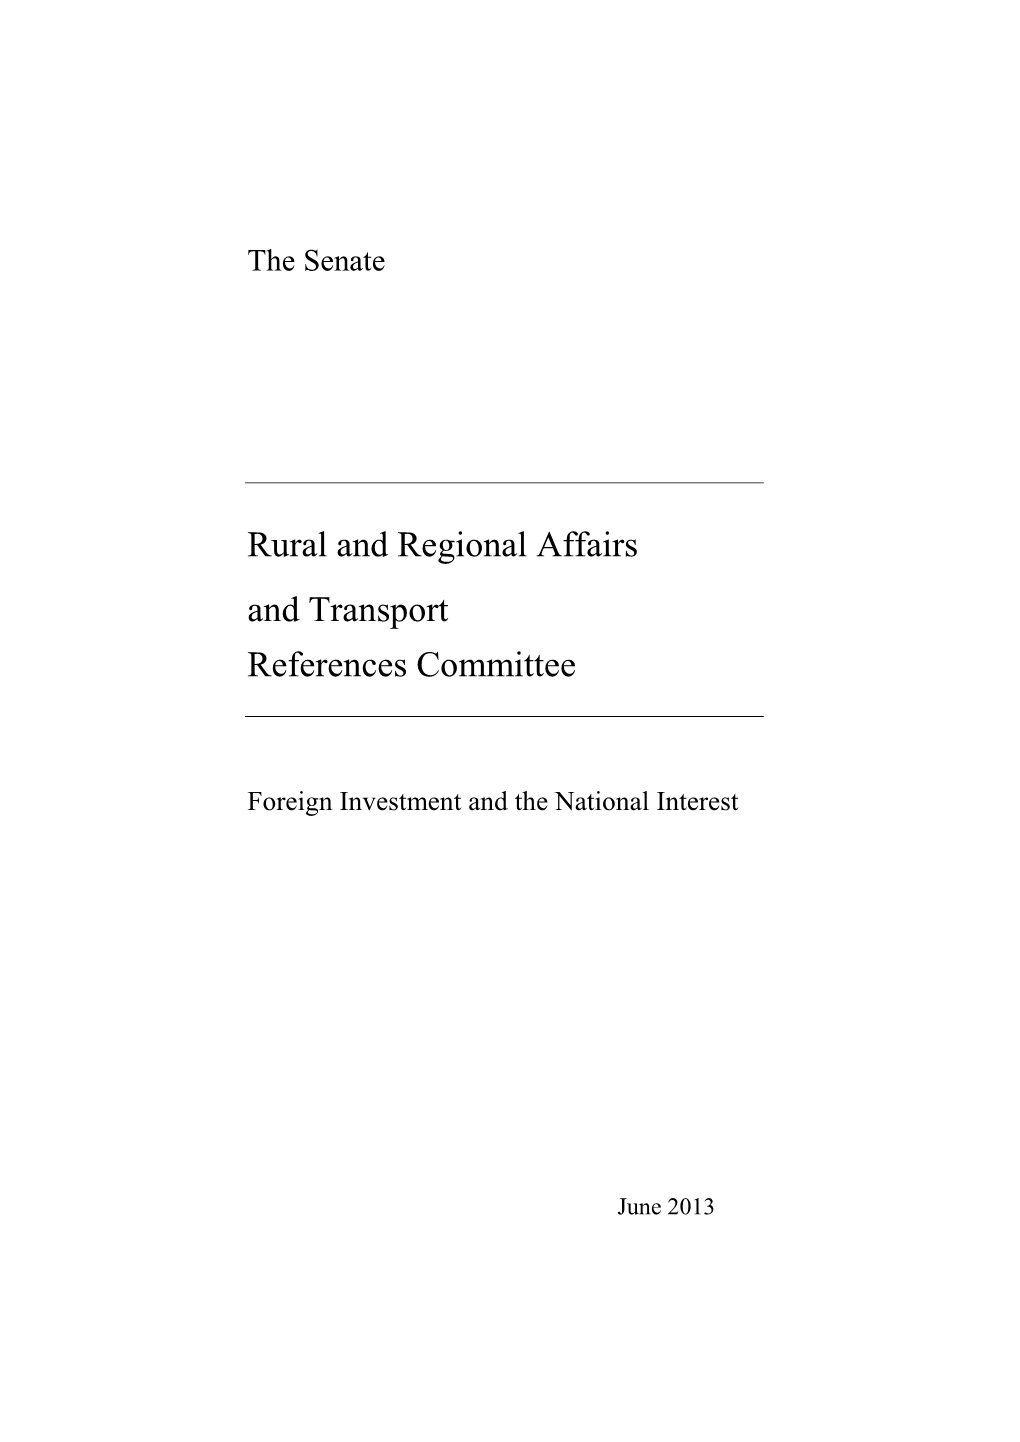 Rural and Regional Affairs and Transport References Committee